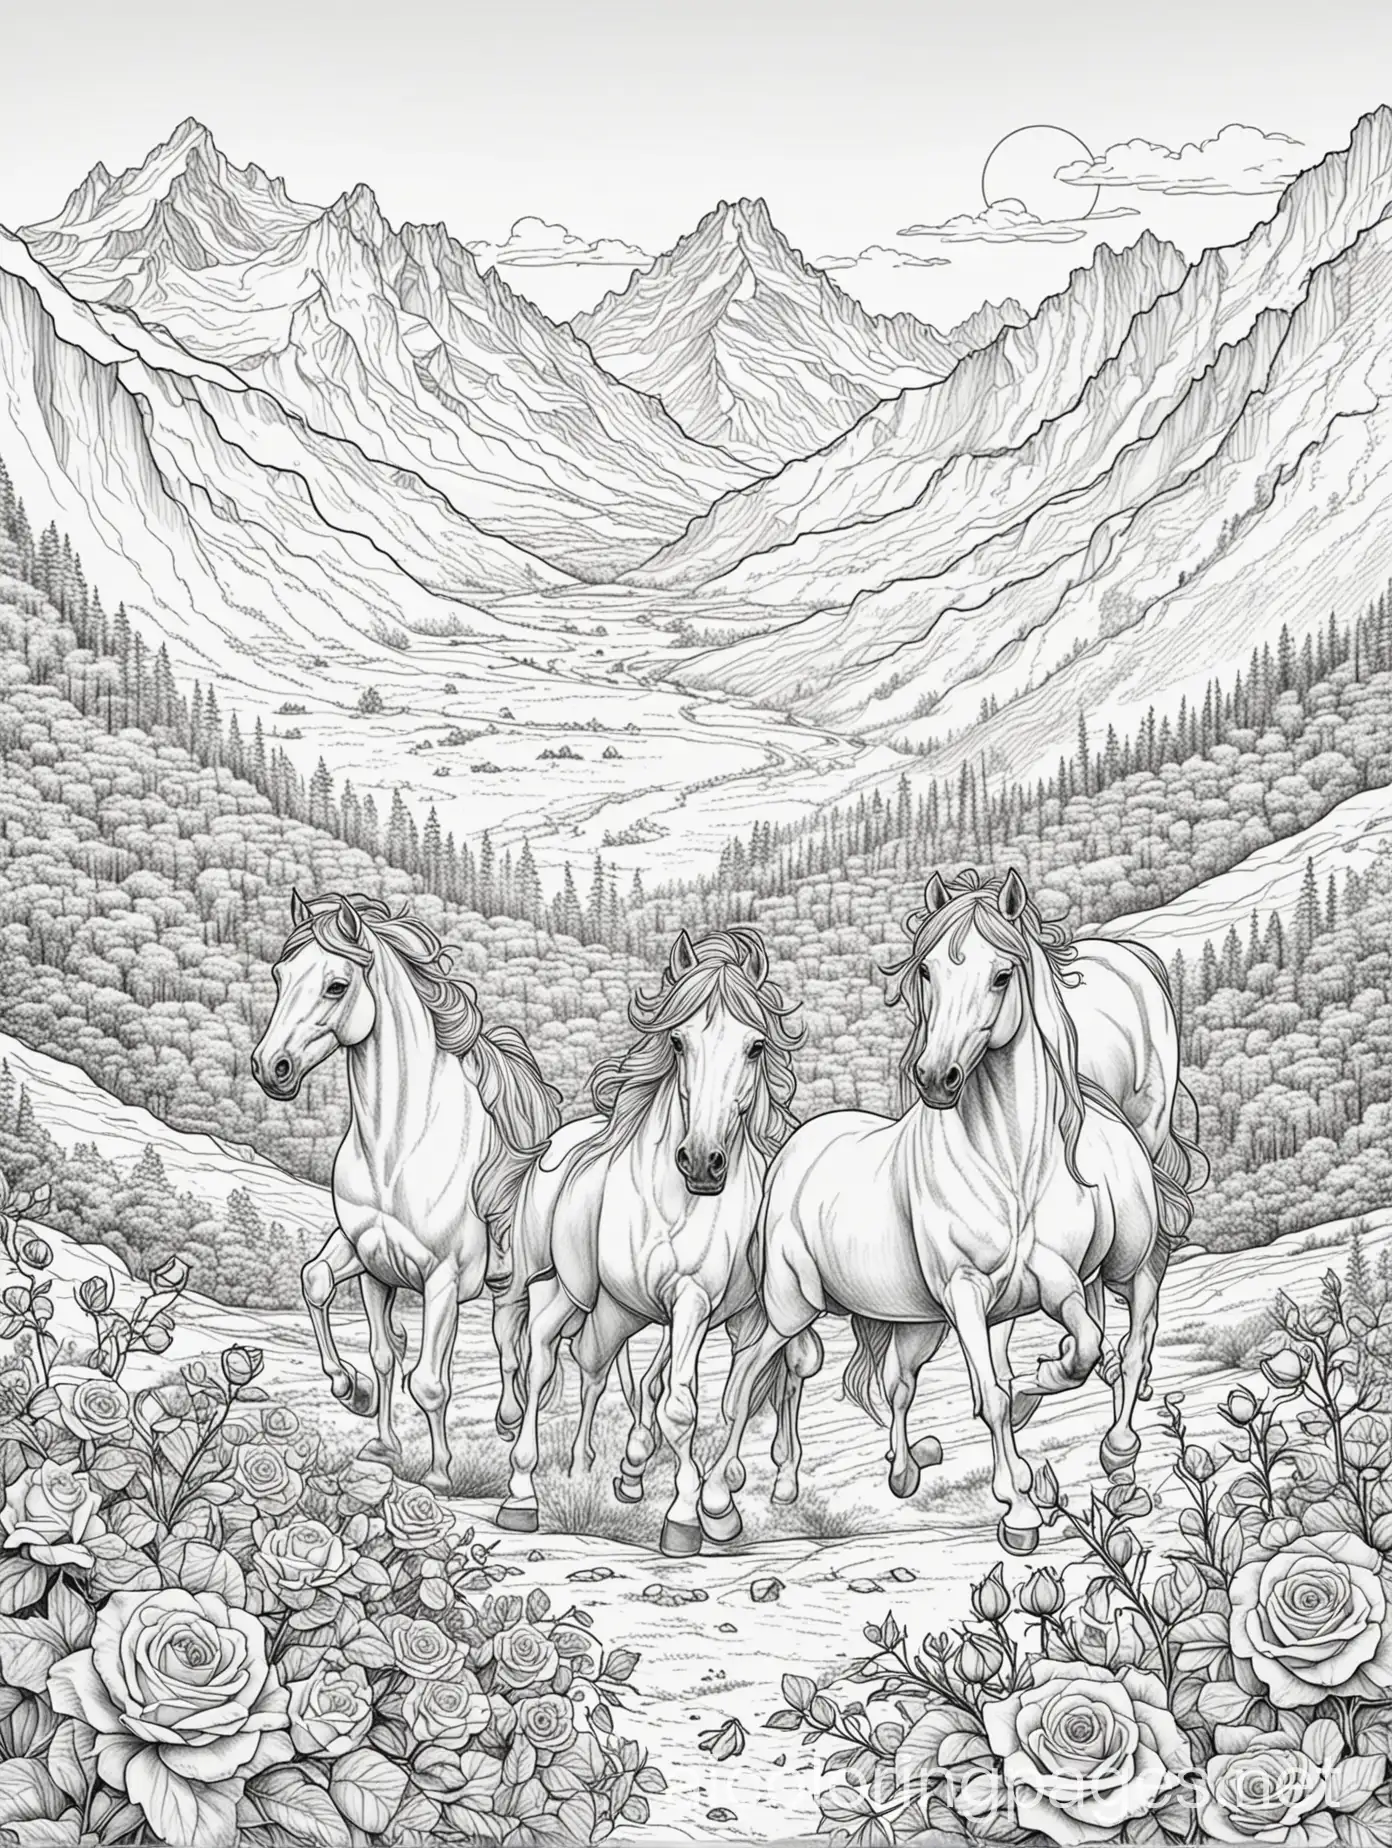 mountains and roses with horses running, Coloring Page, black and white, line art, white background, Simplicity, Ample White Space. The background of the coloring page is plain white to make it easy for young children to color within the lines. The outlines of all the subjects are easy to distinguish, making it simple for kids to color without too much difficulty